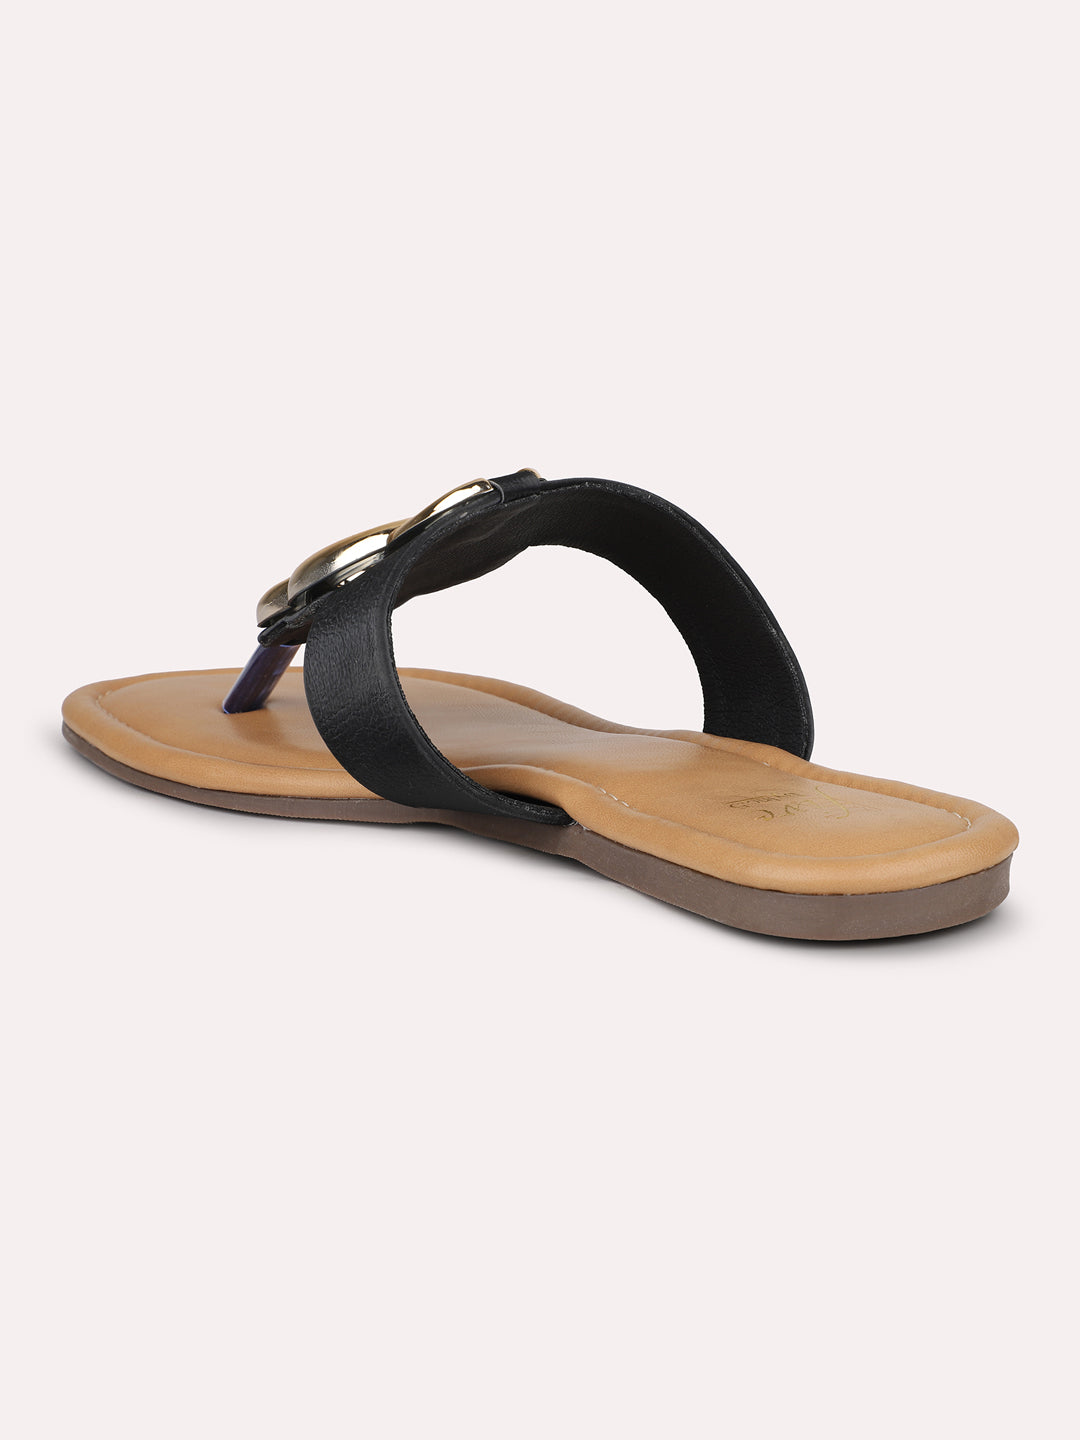 Women Black And Gold-Toned T-Strap Flats With Buckles